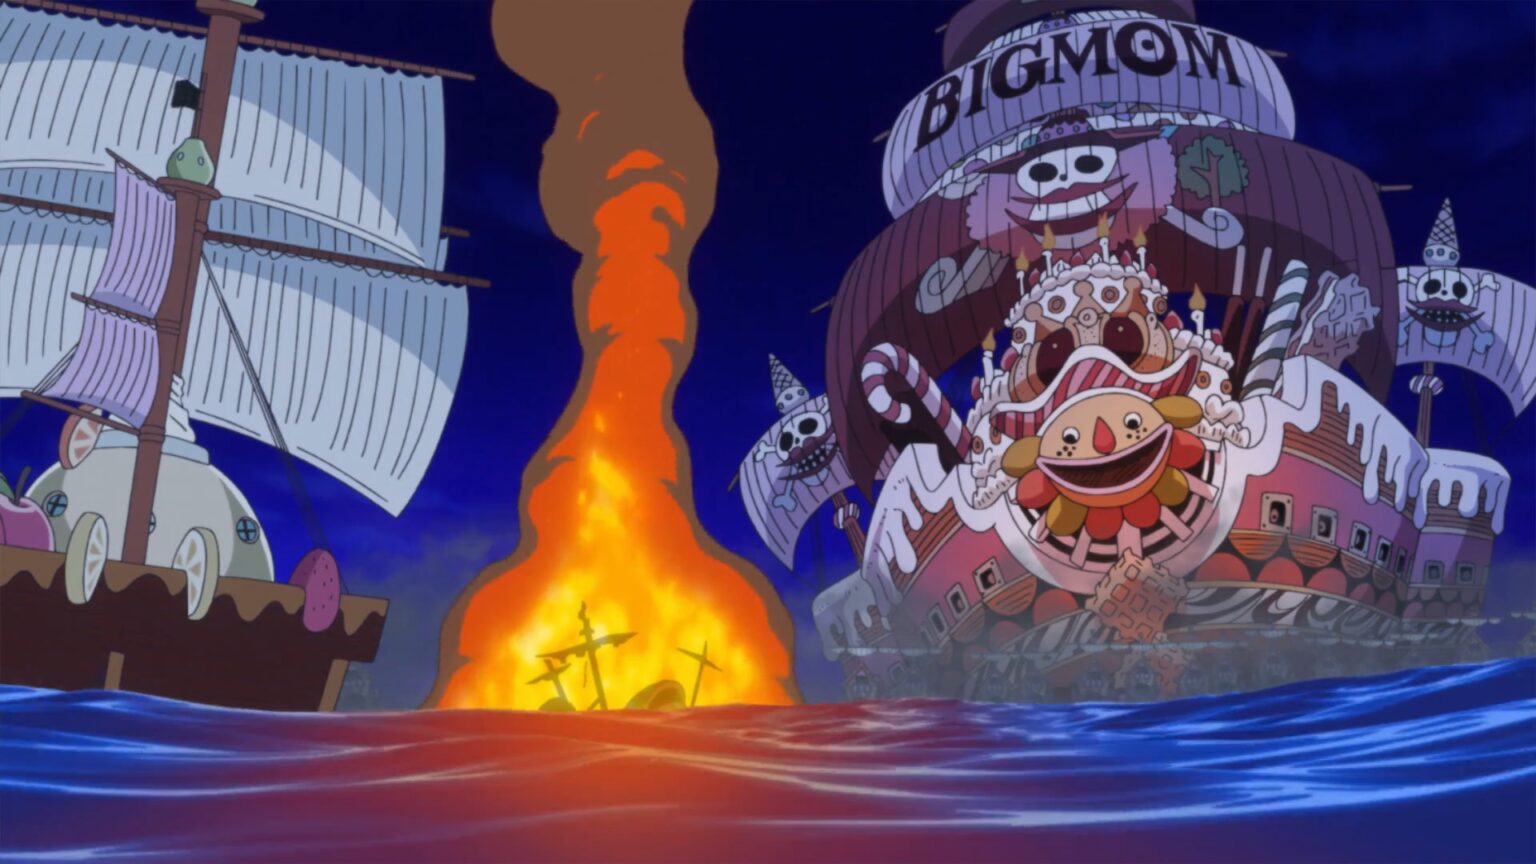 One Piece 876 Big Mom Pirates are one of the biggest and strongest pirate crews.